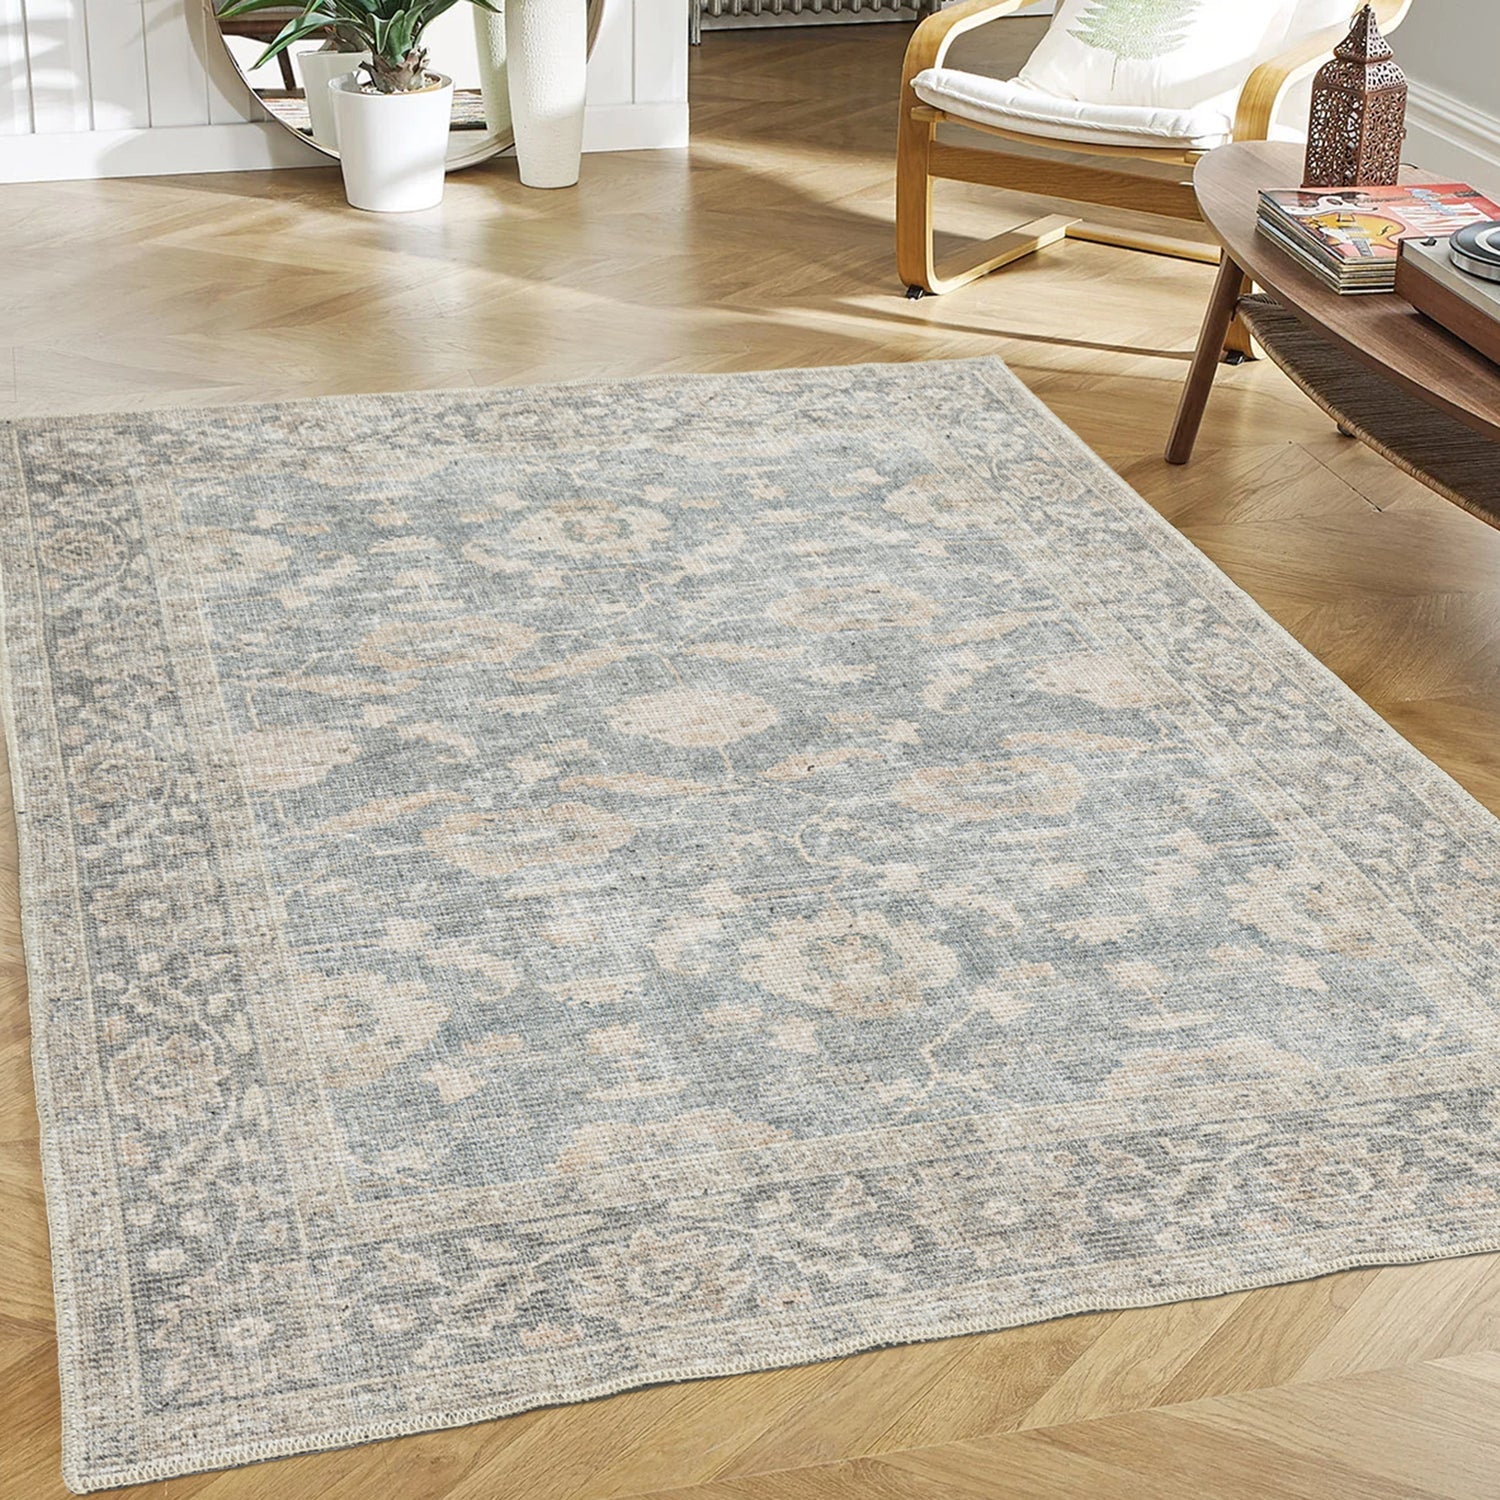 beige ivory cotton and polyster machine washable traditional rustic area rug 2x5, 3x5 Runner Rug, Entry Way, Entrance, Balcony, Bedside, Home Office, Table Top